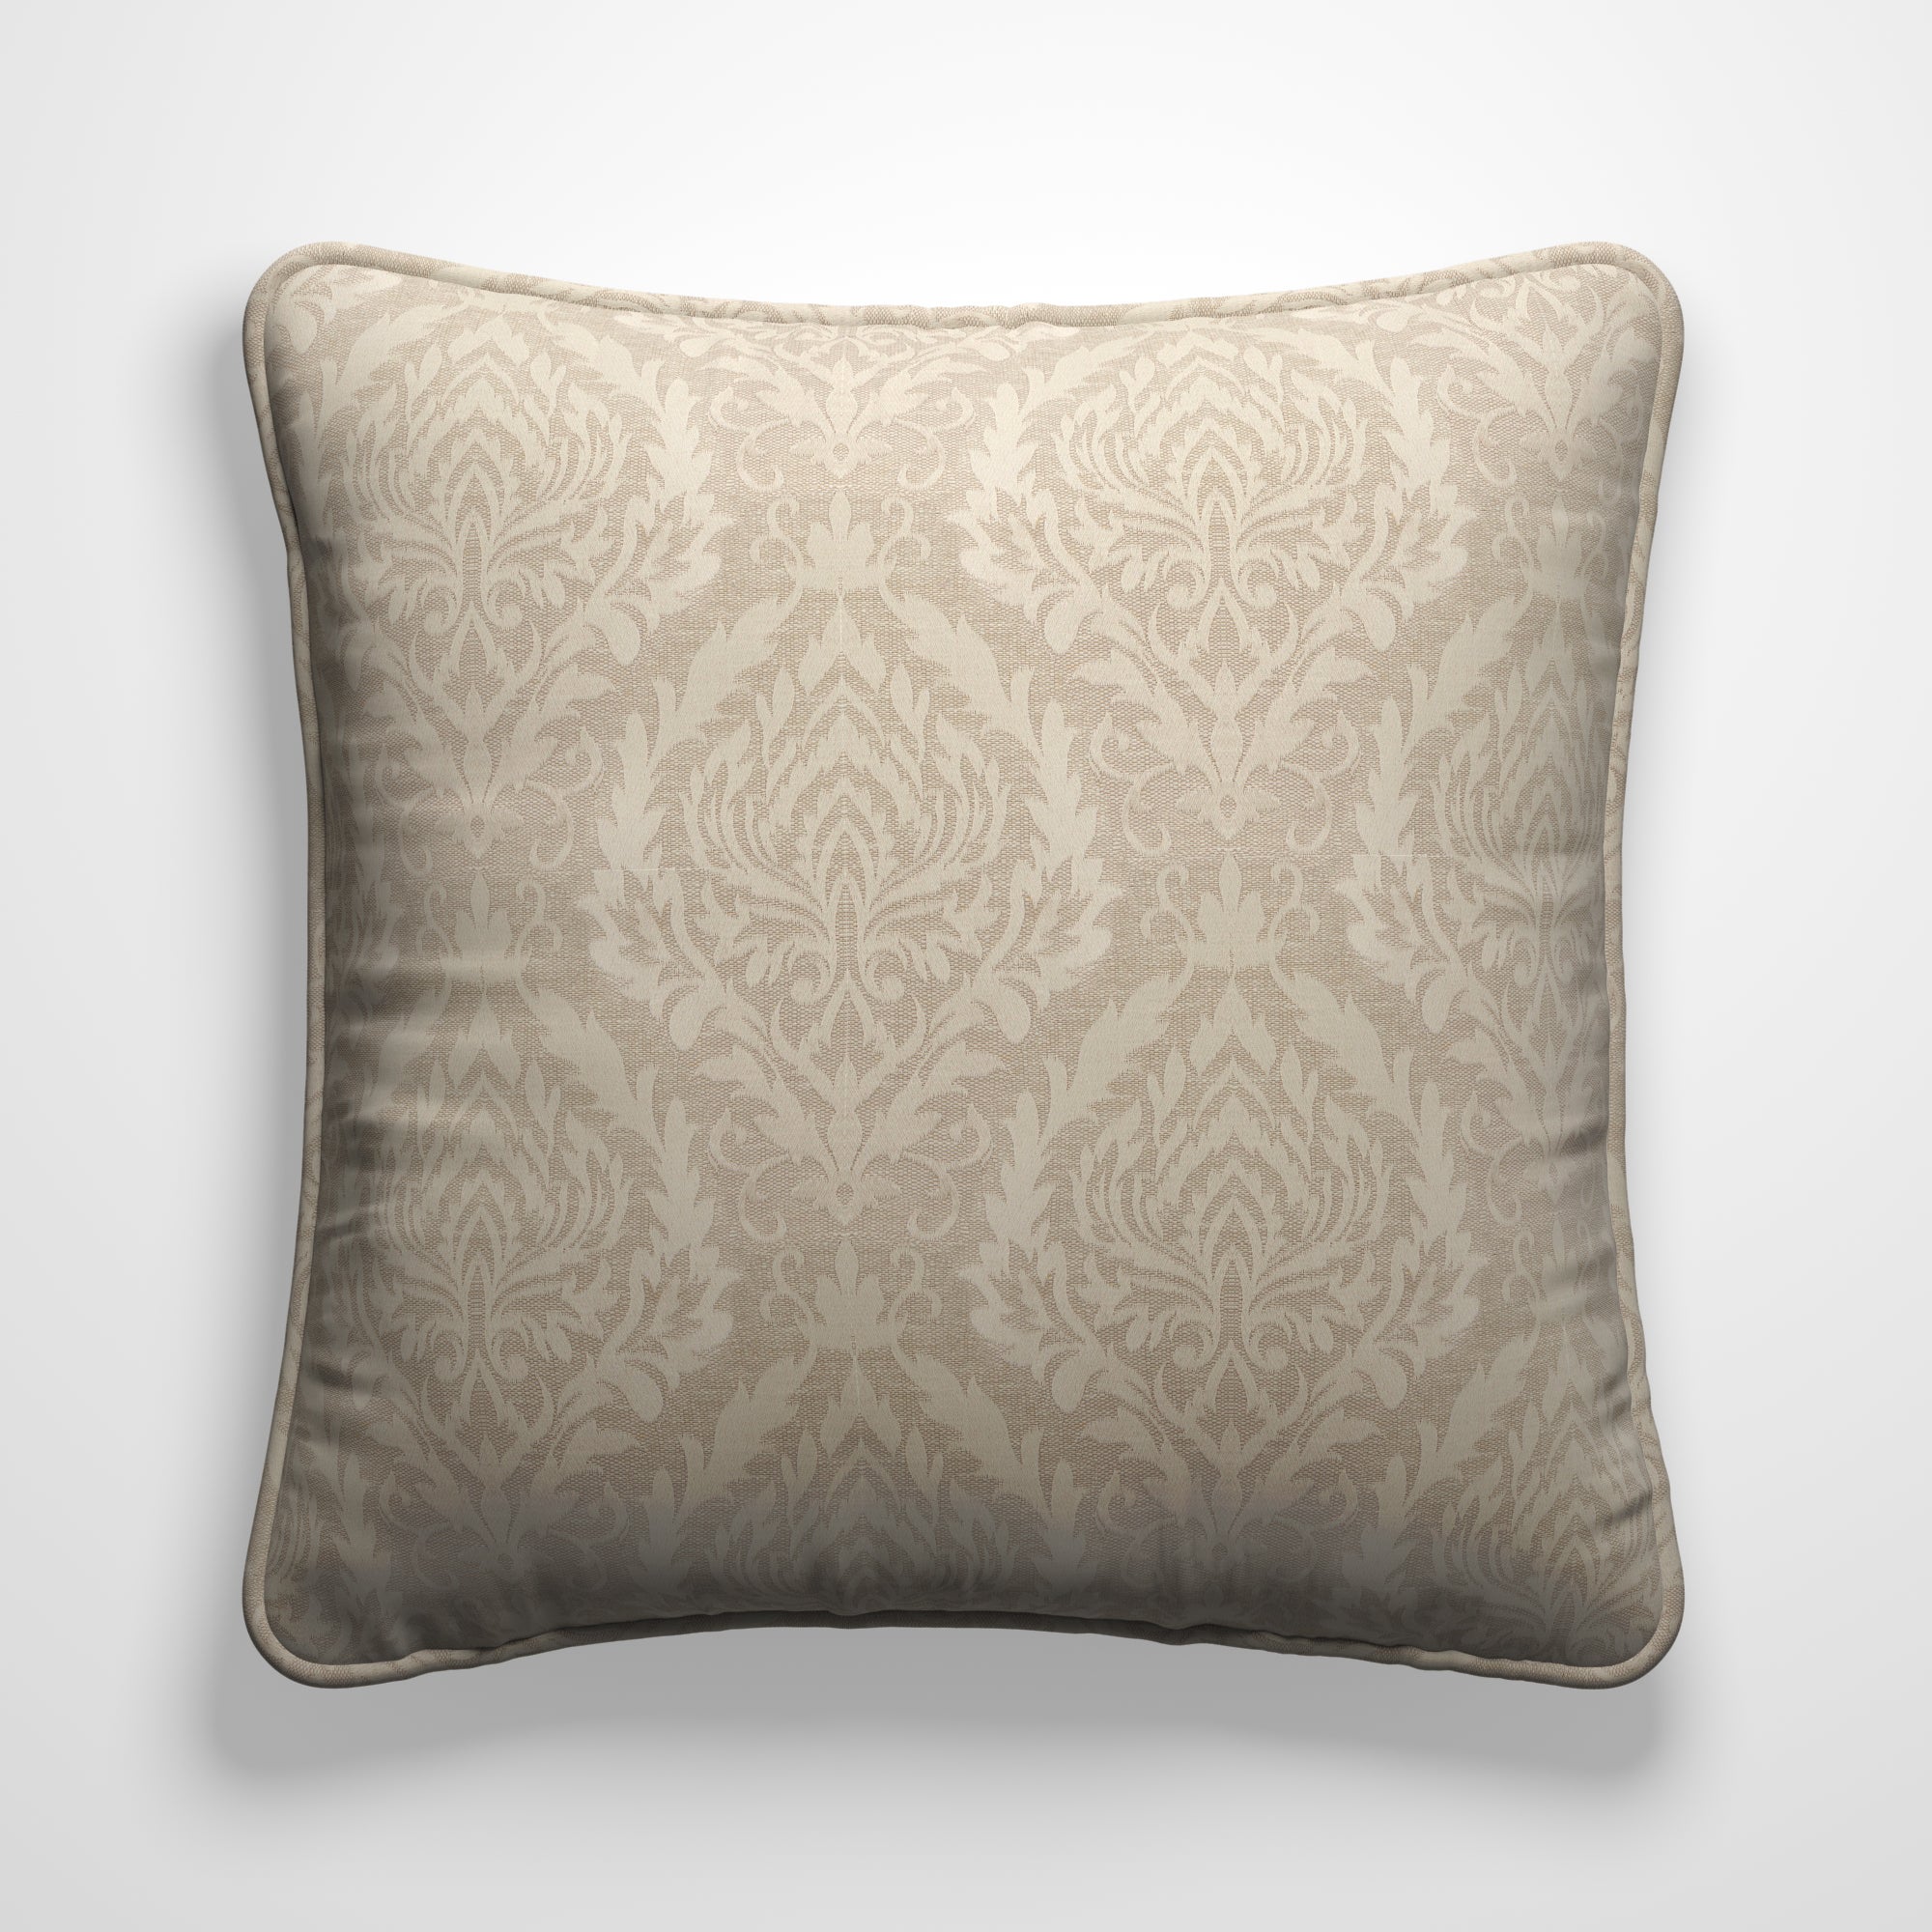 Auvergne Made to Order Cushion Cover Auvergne Ivory